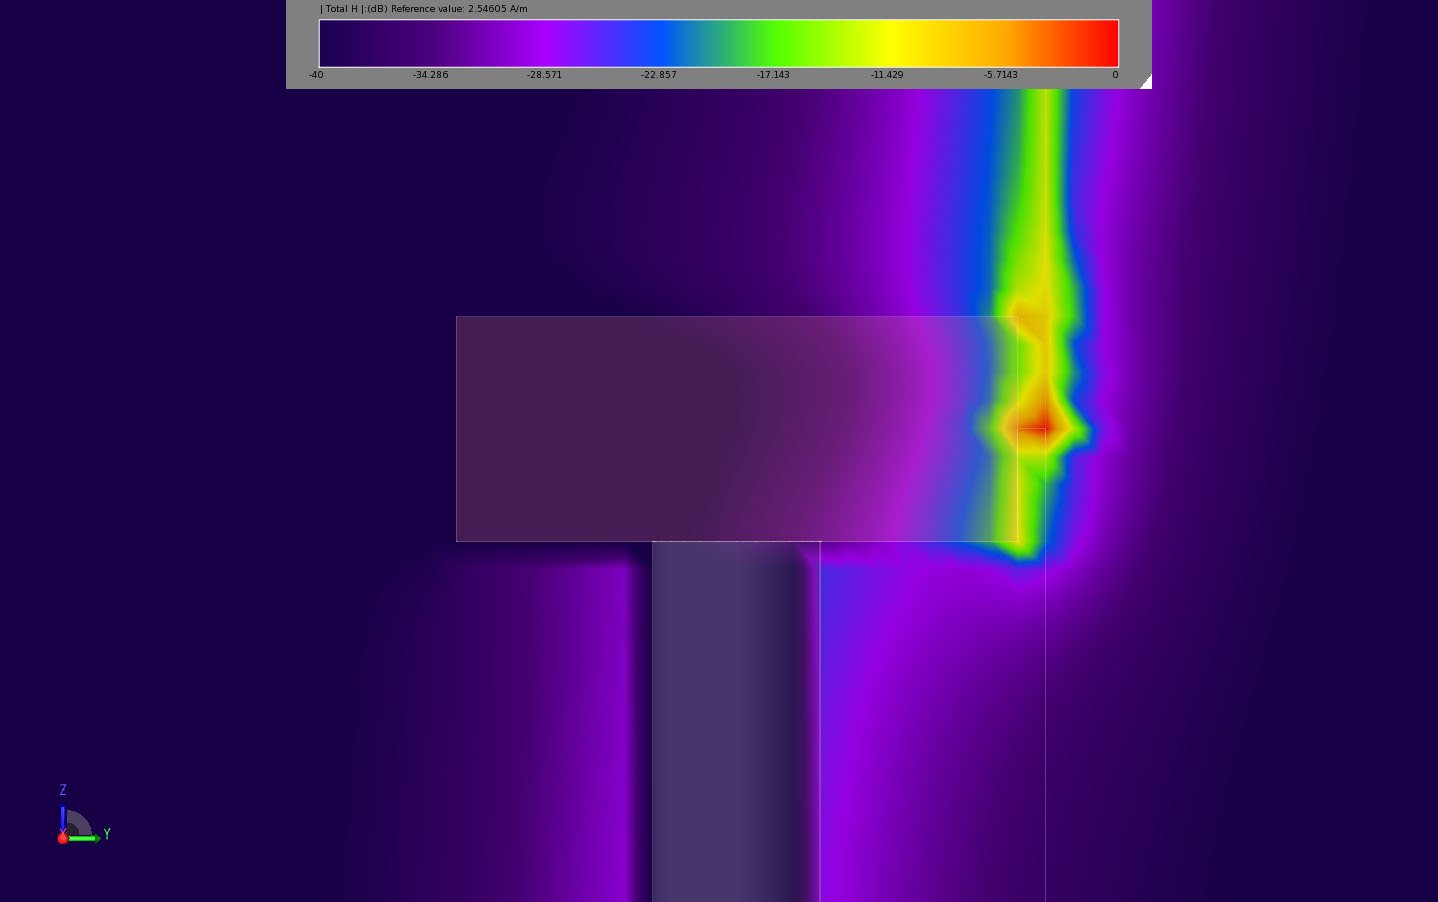 Figure 9The planar time-domain magnetic fields are shown in the cross section of the nacelle for a strike on the blade tip.